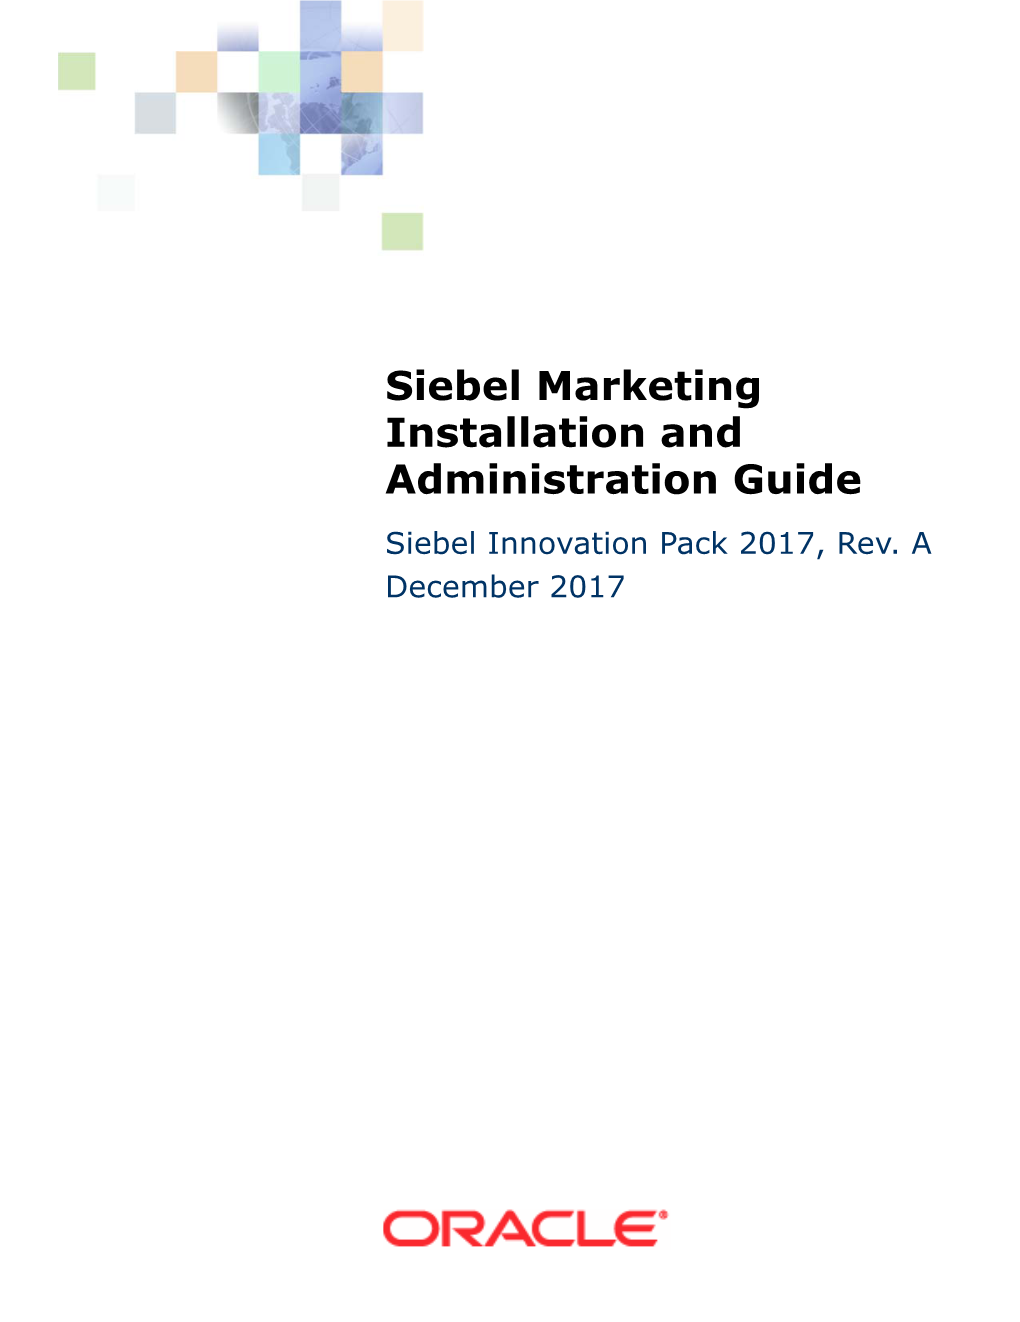 Siebel Marketing Installation and Administration Guide Siebel Innovation Pack 2017, Rev